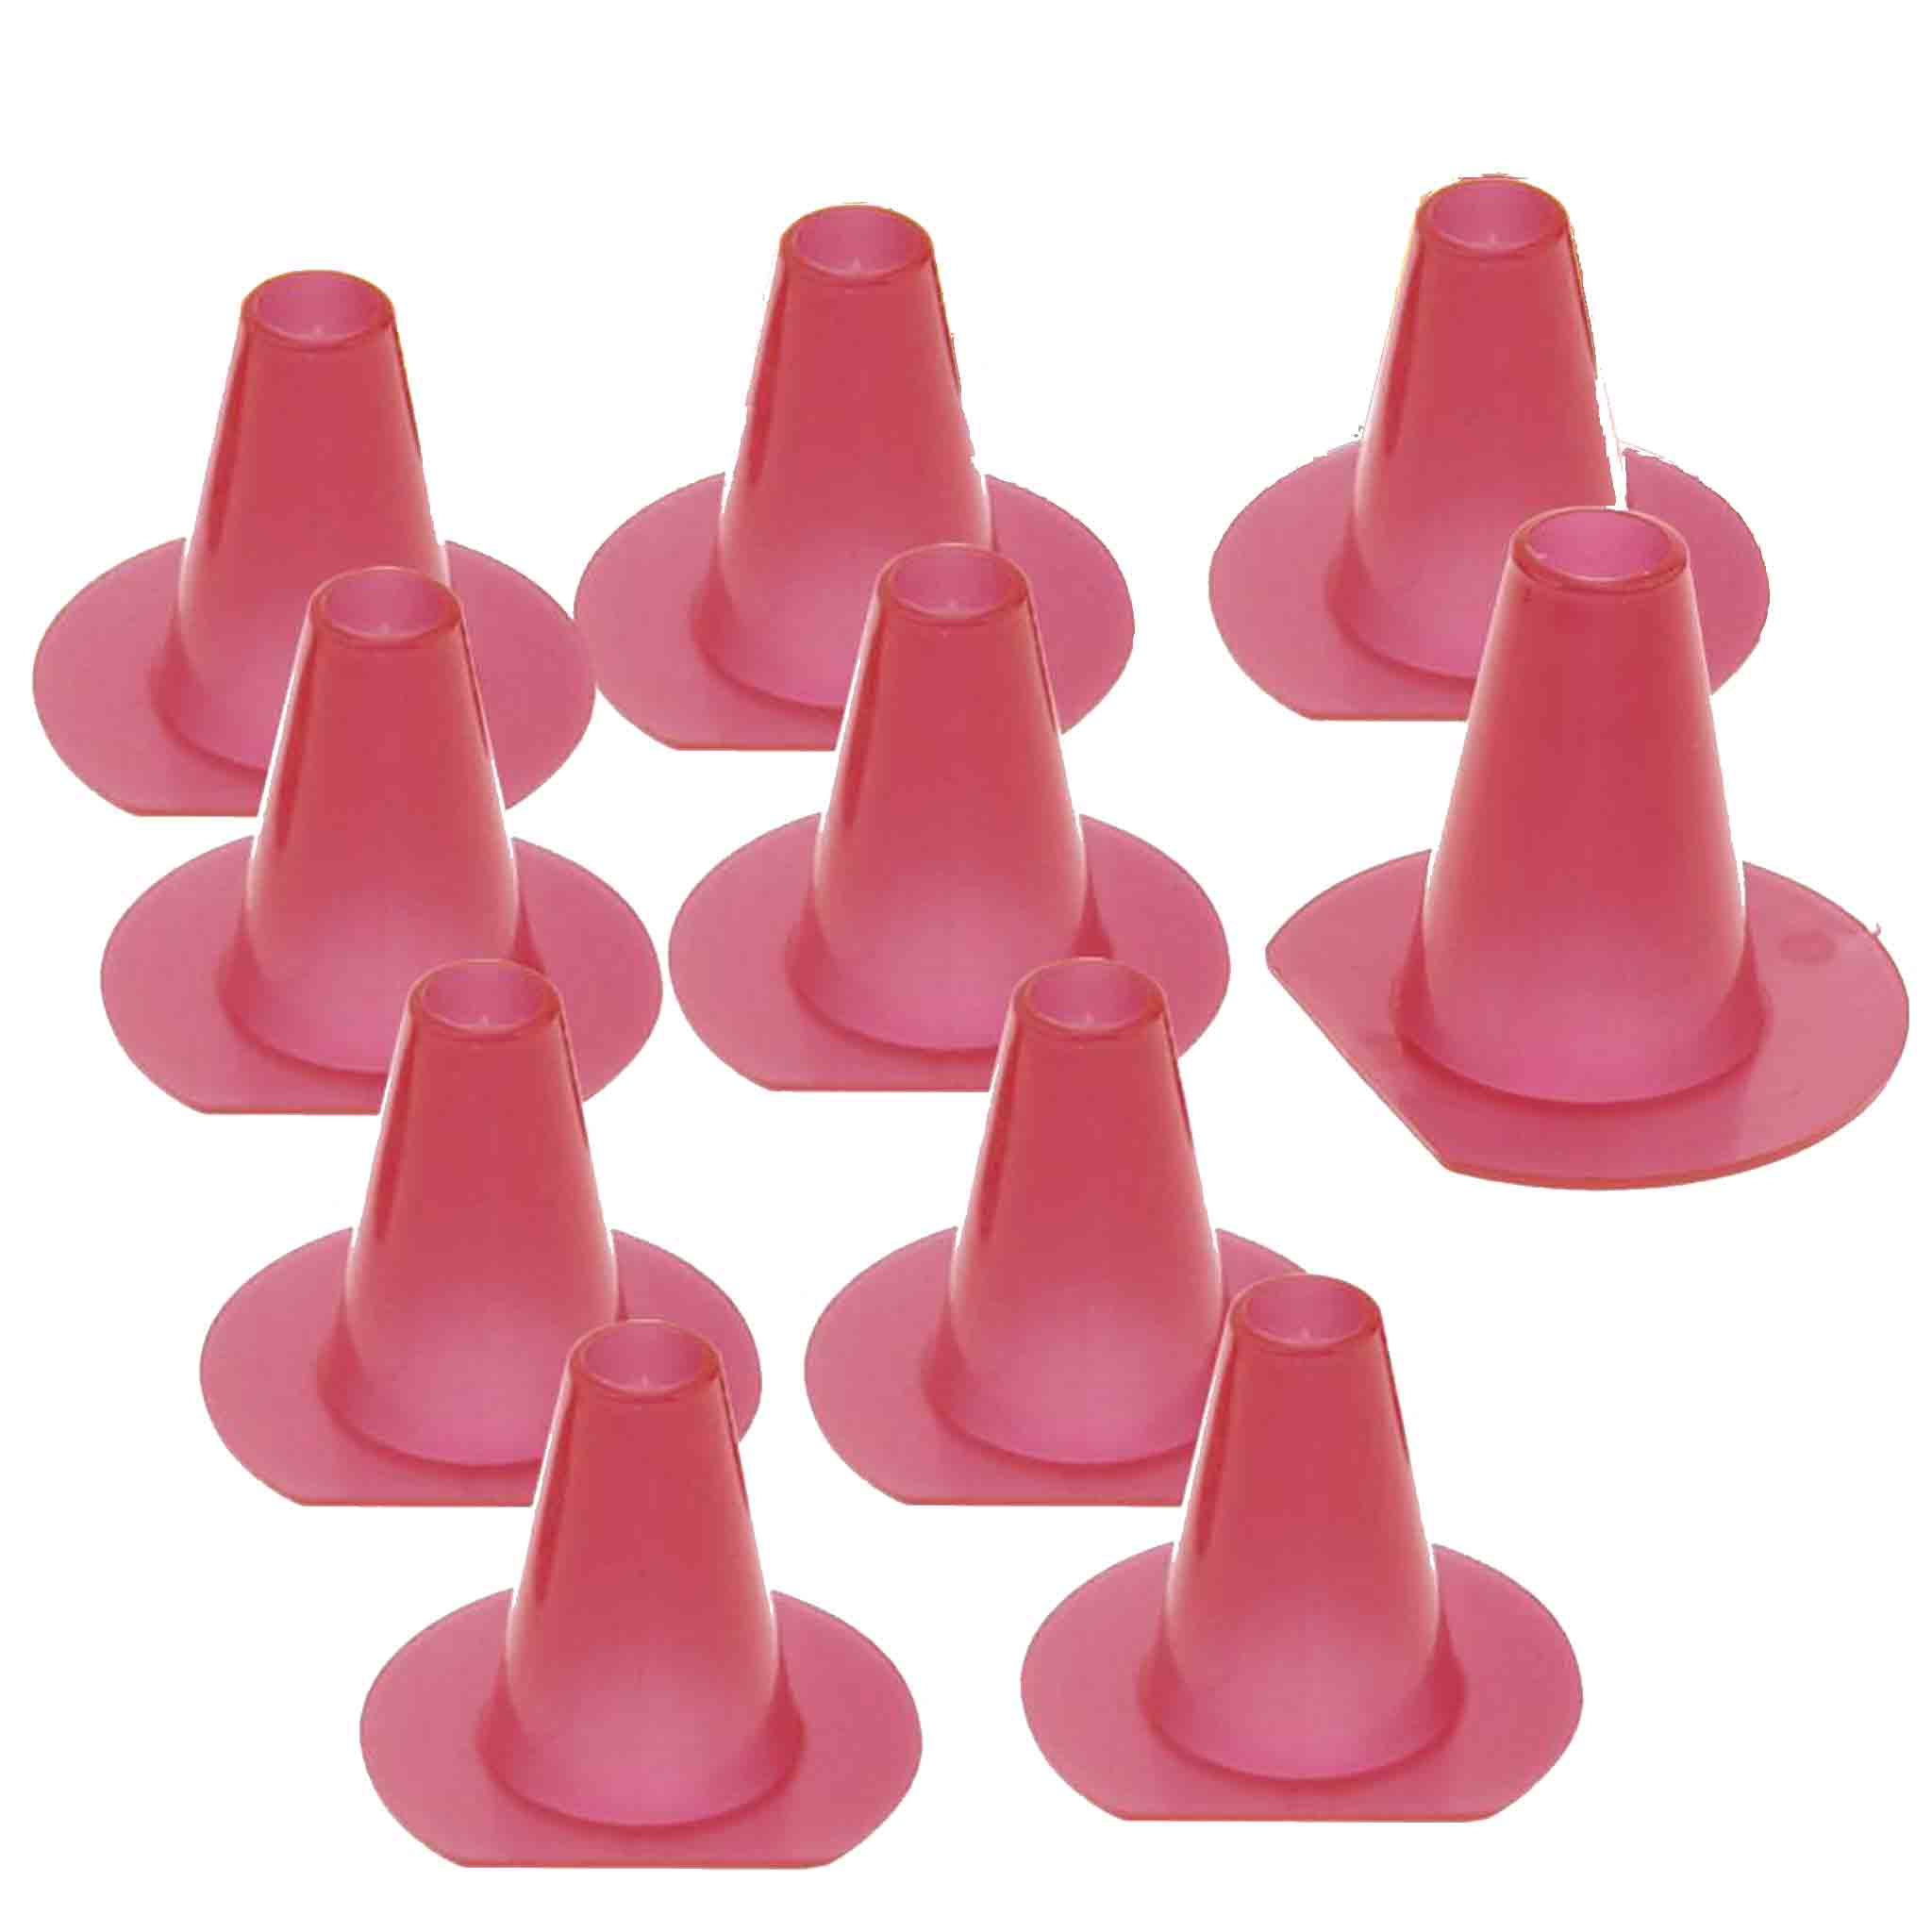 Conical Bee Escape Cones - Red Plastic - 10 Pack - Accessories collection by Buzzbee Beekeeping Supplies